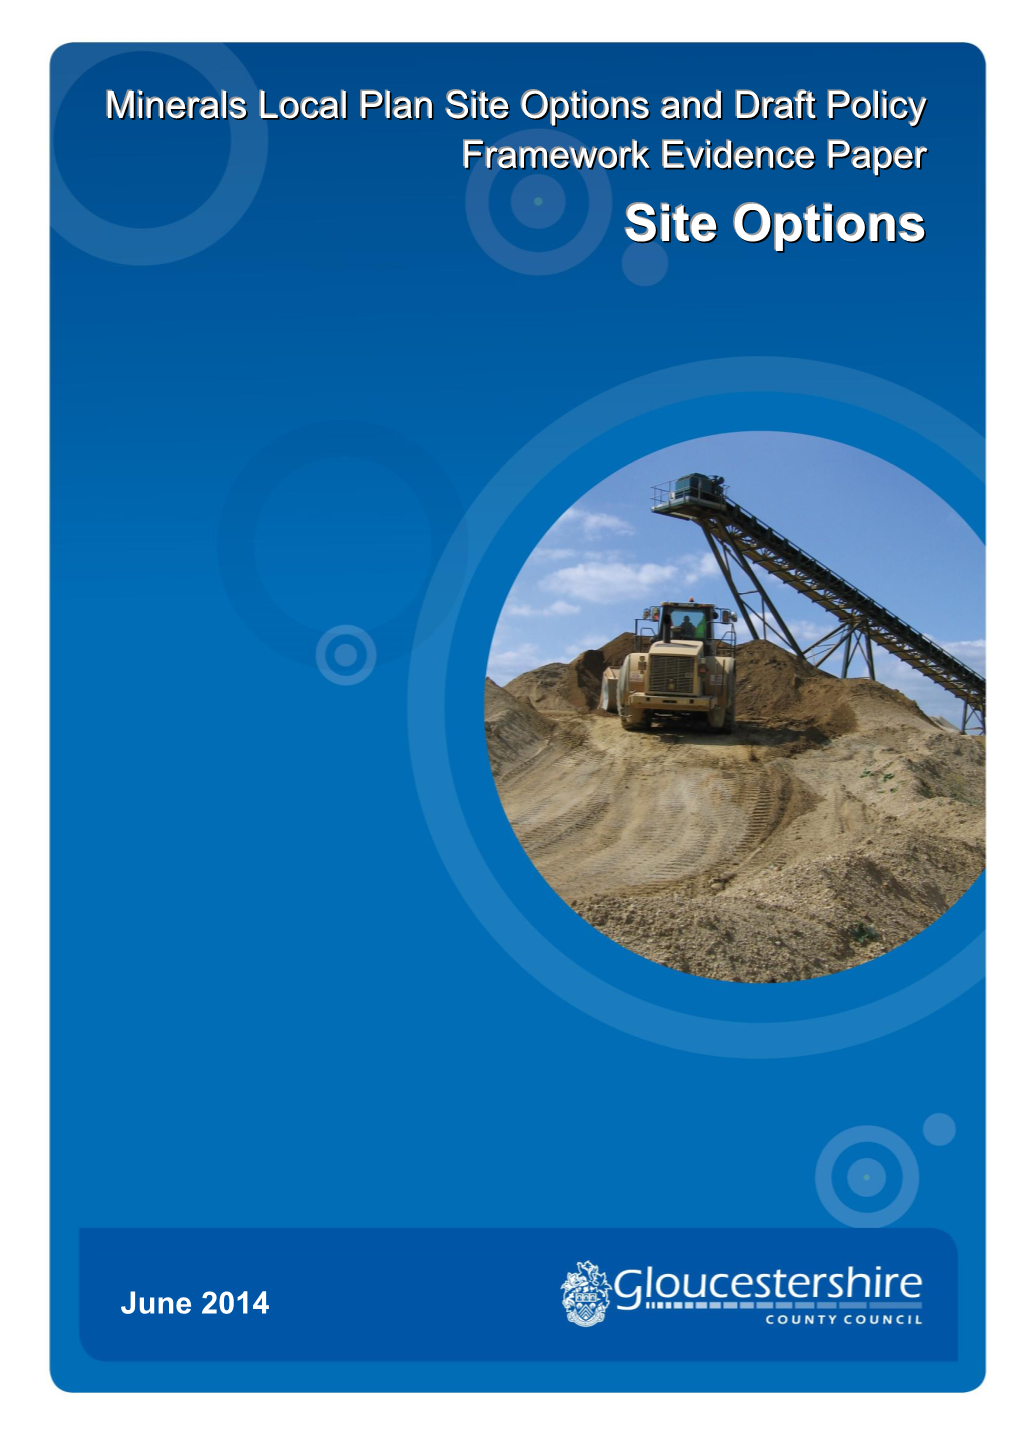 Minerals Local Plan Site Options and Draft Policy Framework Evidence